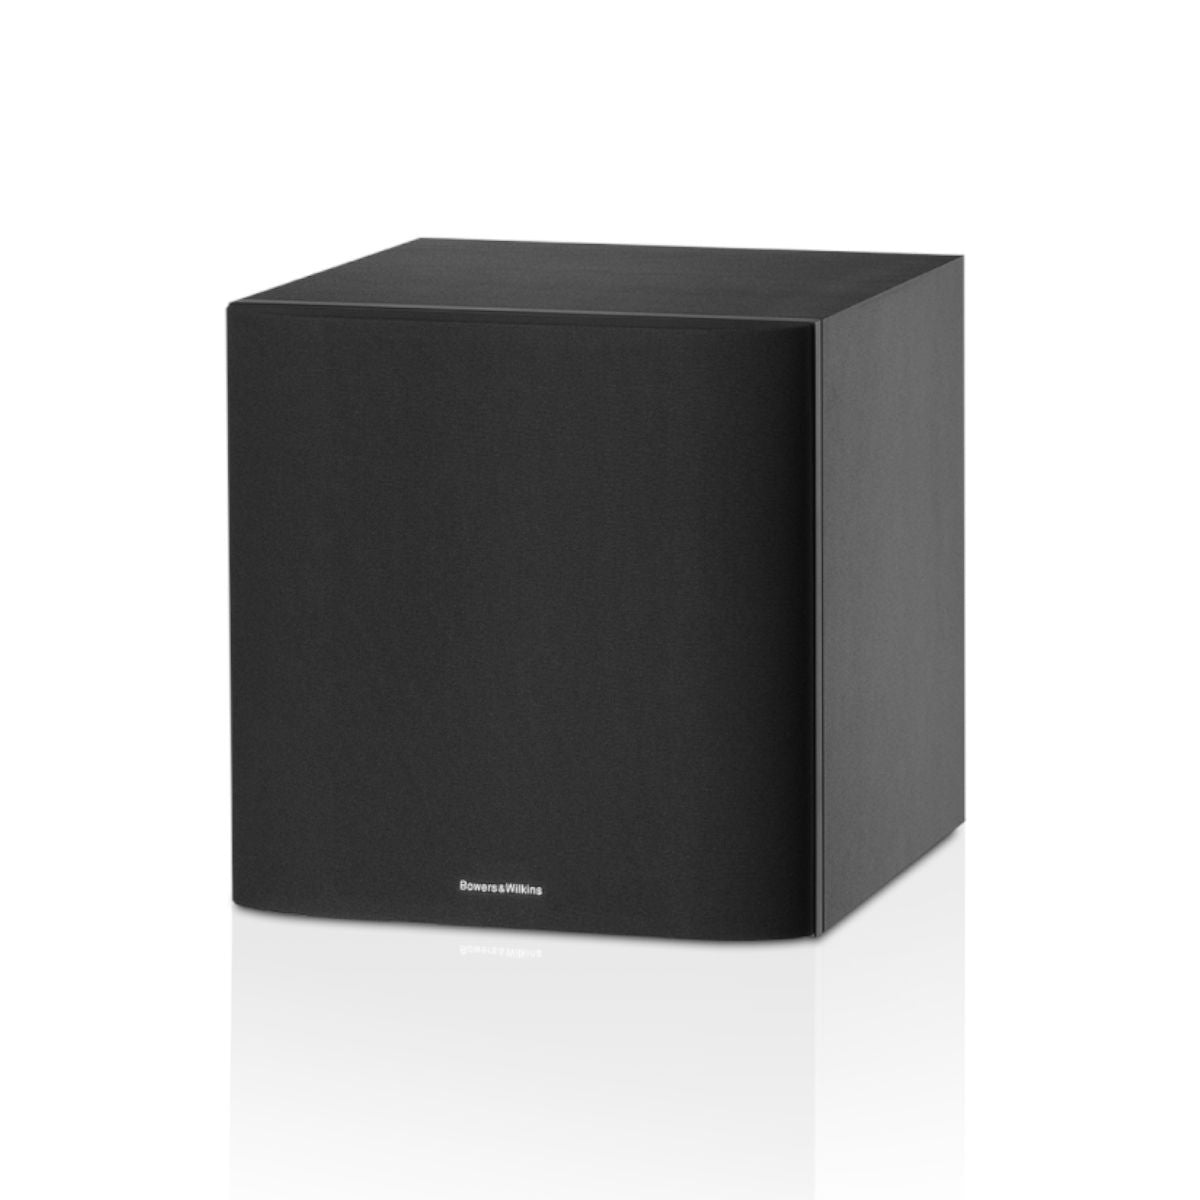 Buy Bowers & Wilkins (B&W) ASW610 Active subwoofer 200W at best